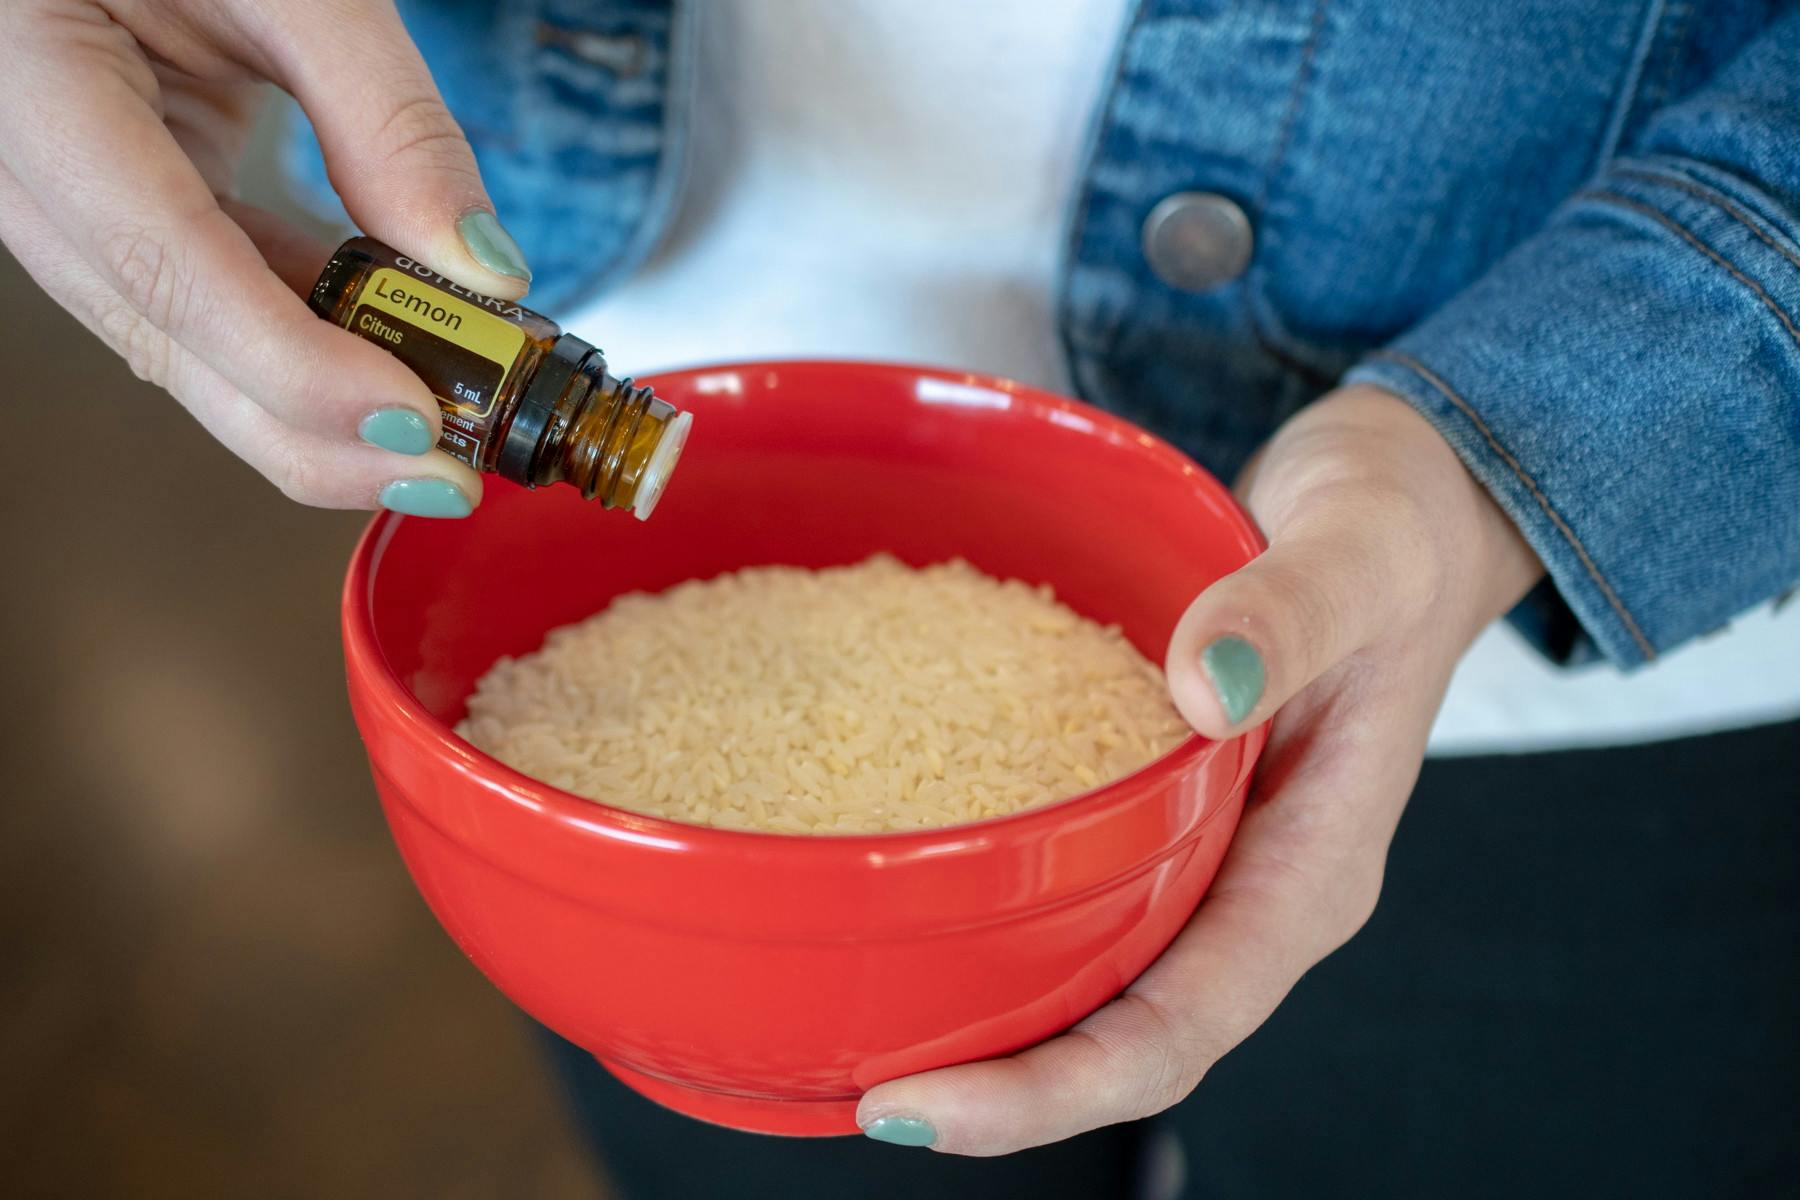 A woman adding a few drops of essential oil to a bowl of rice